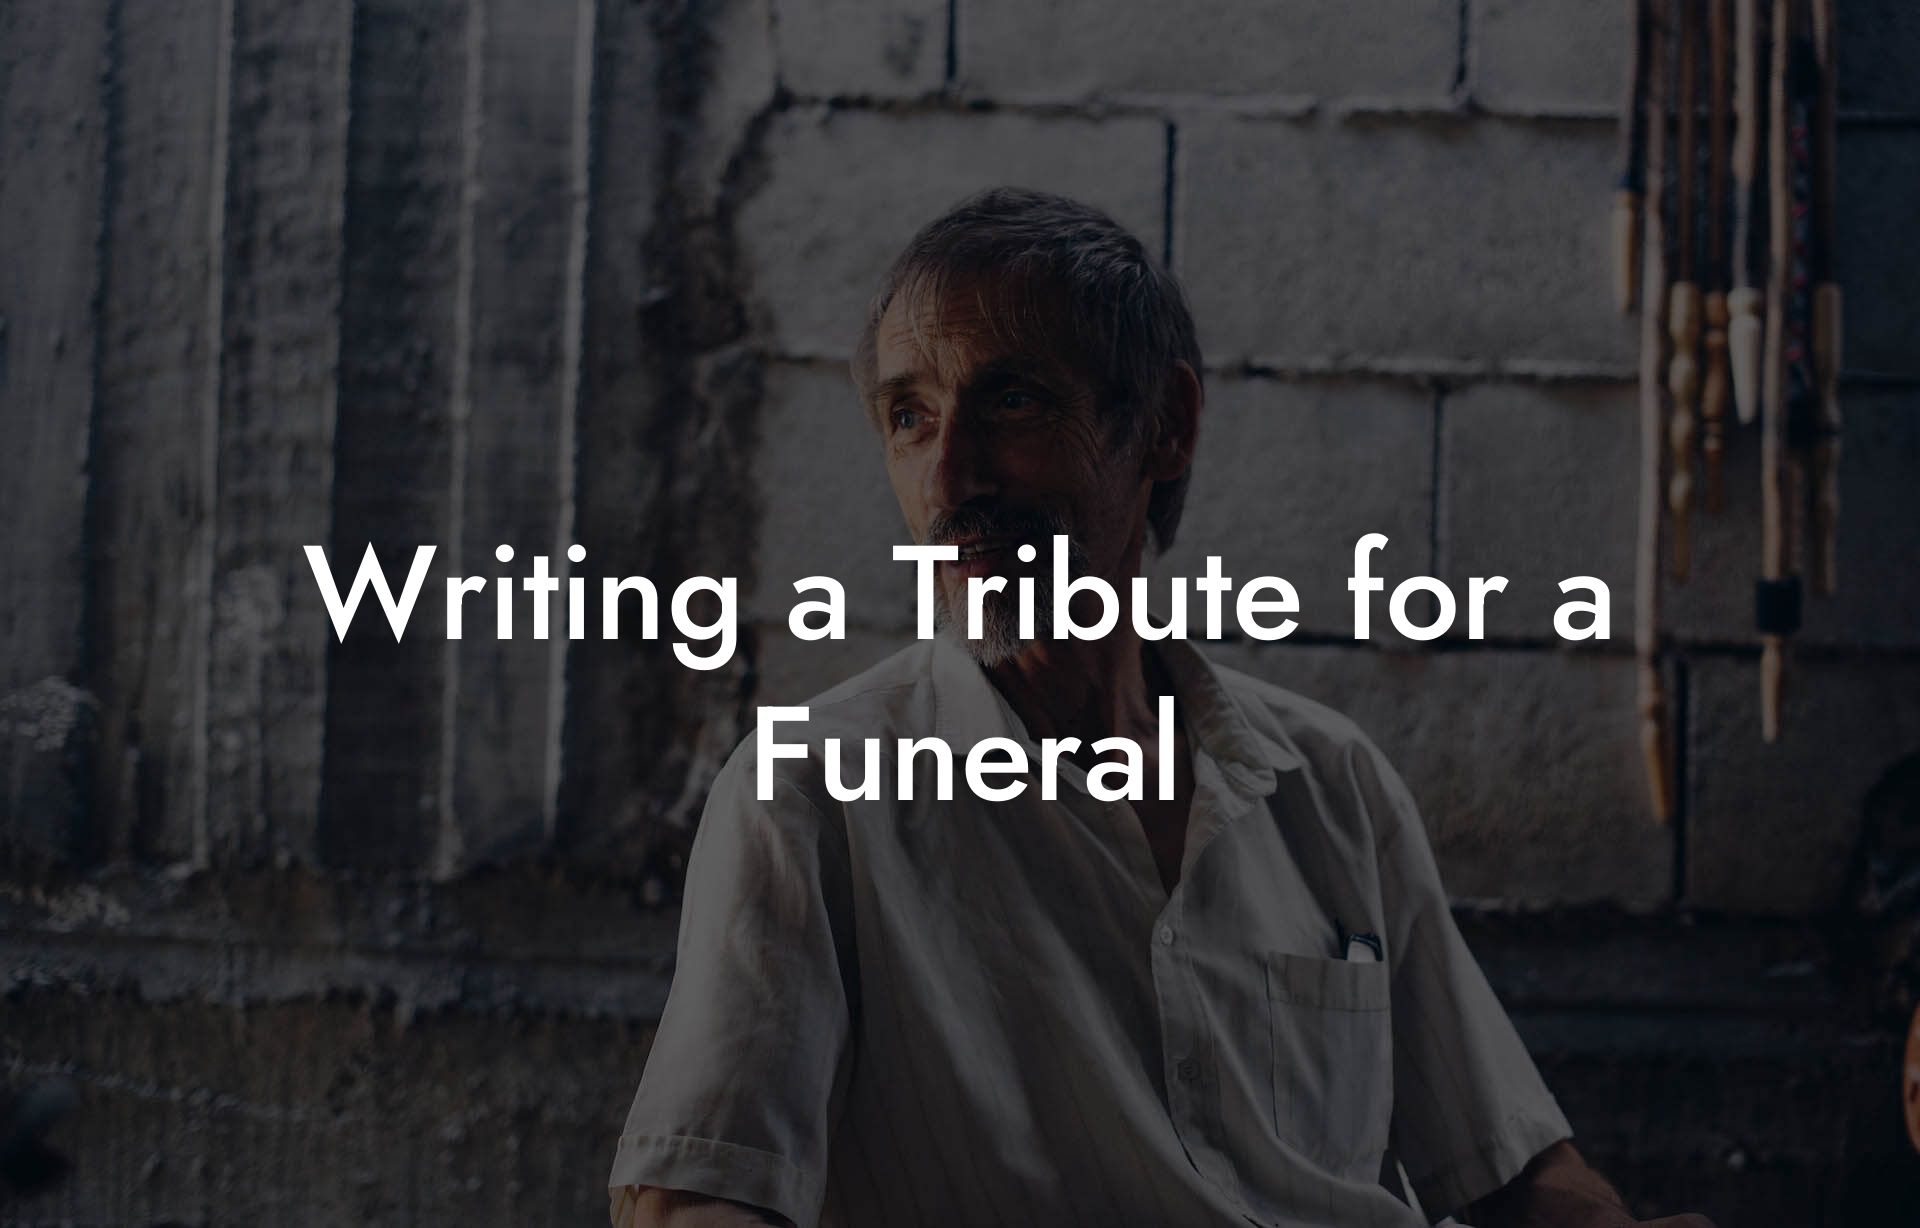 Writing a Tribute for a Funeral